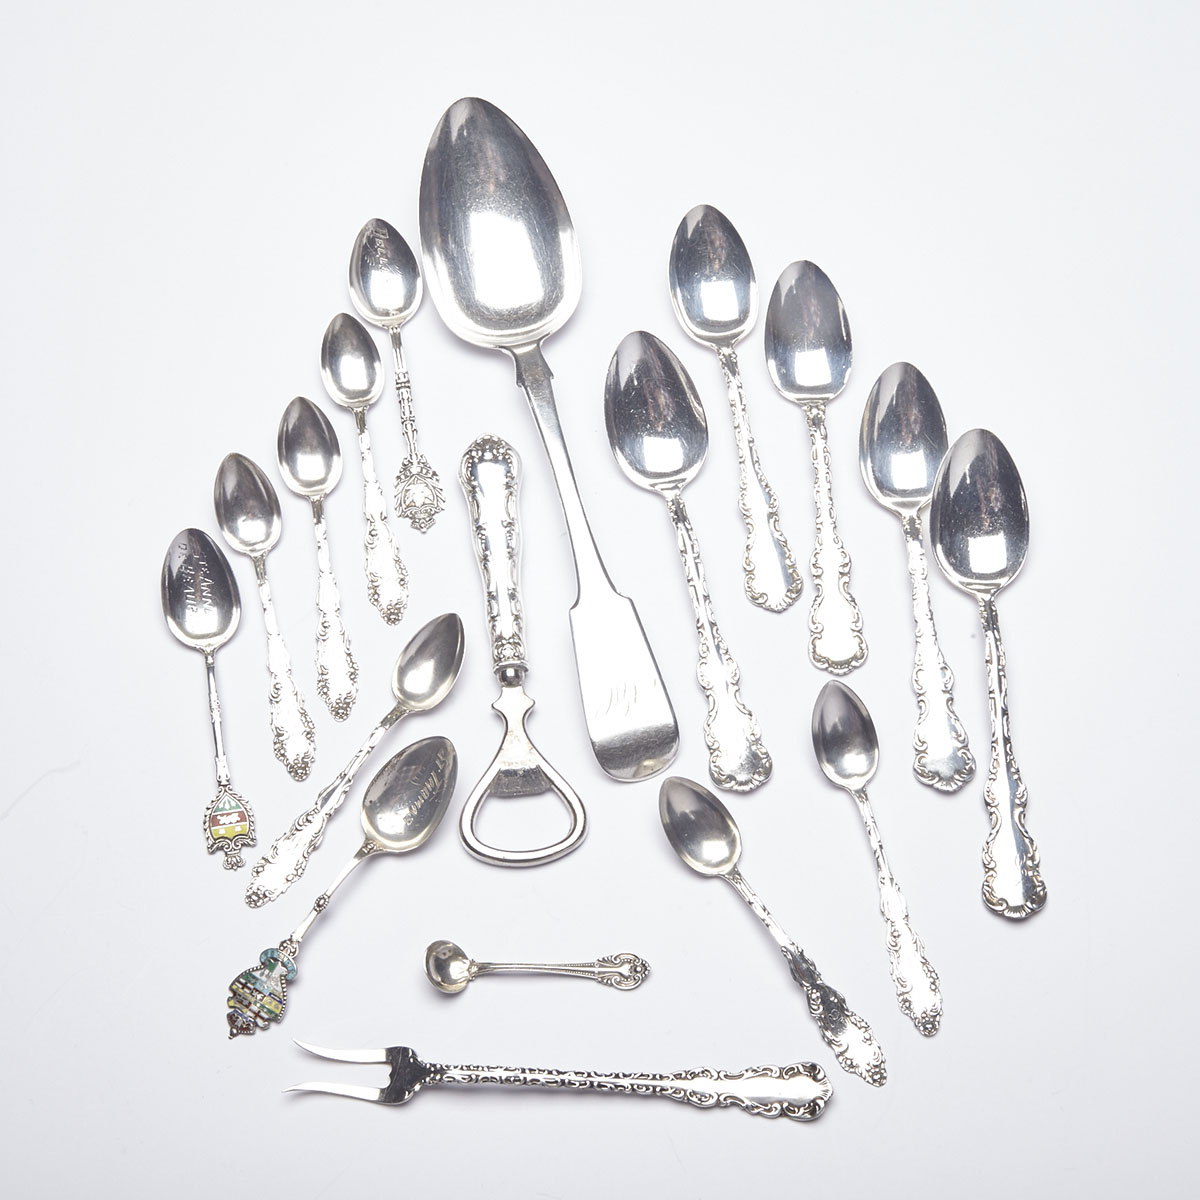 Group of Canadian Silver Flatware, 19th/20th century